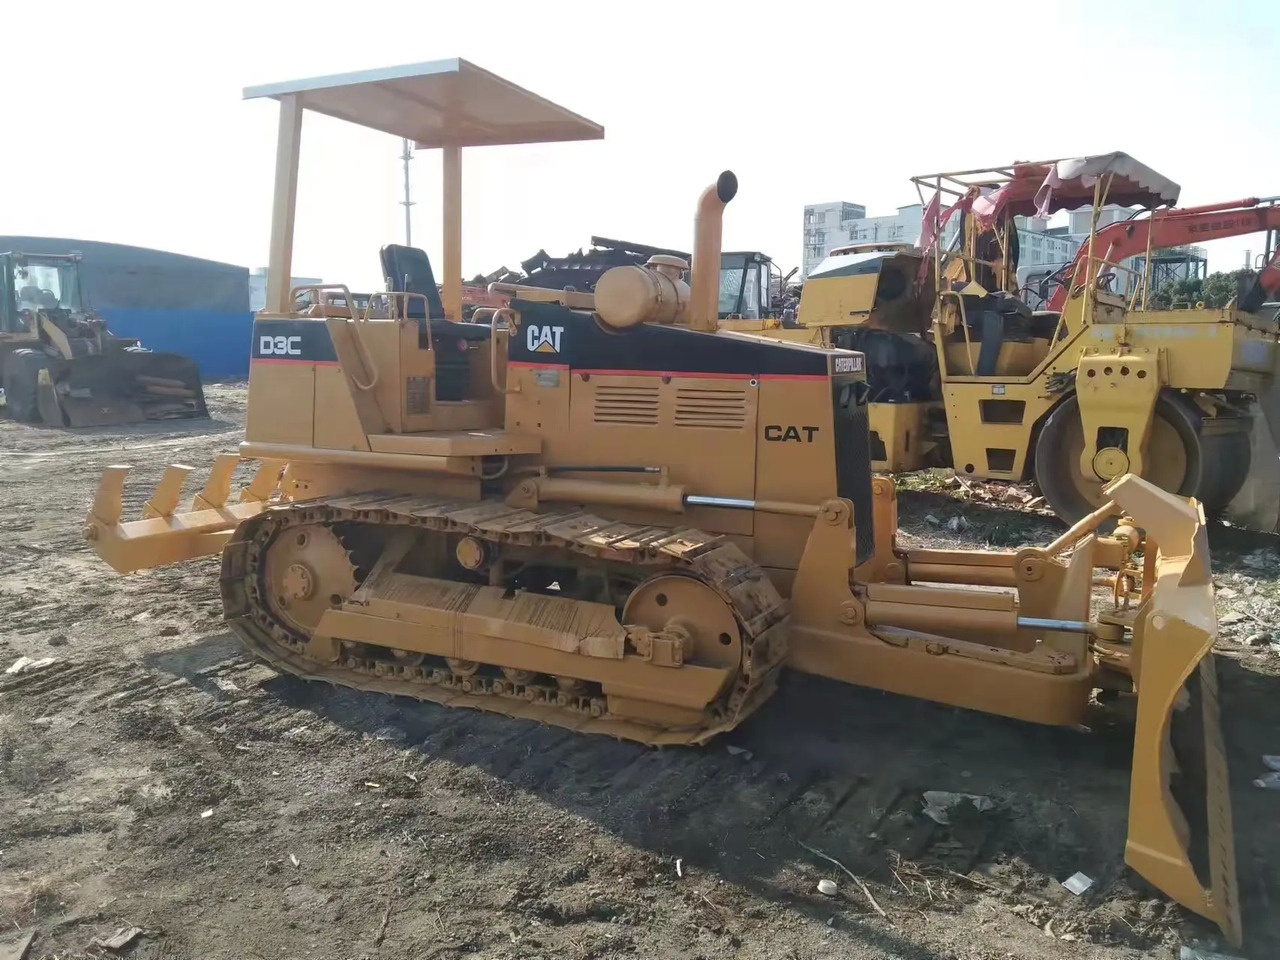 Used Bulldozer CAT D3C Second Hand Wonderful Crawler Bulldozer D5M D6D Able To Be Purchased - Bulldozer: picture 4